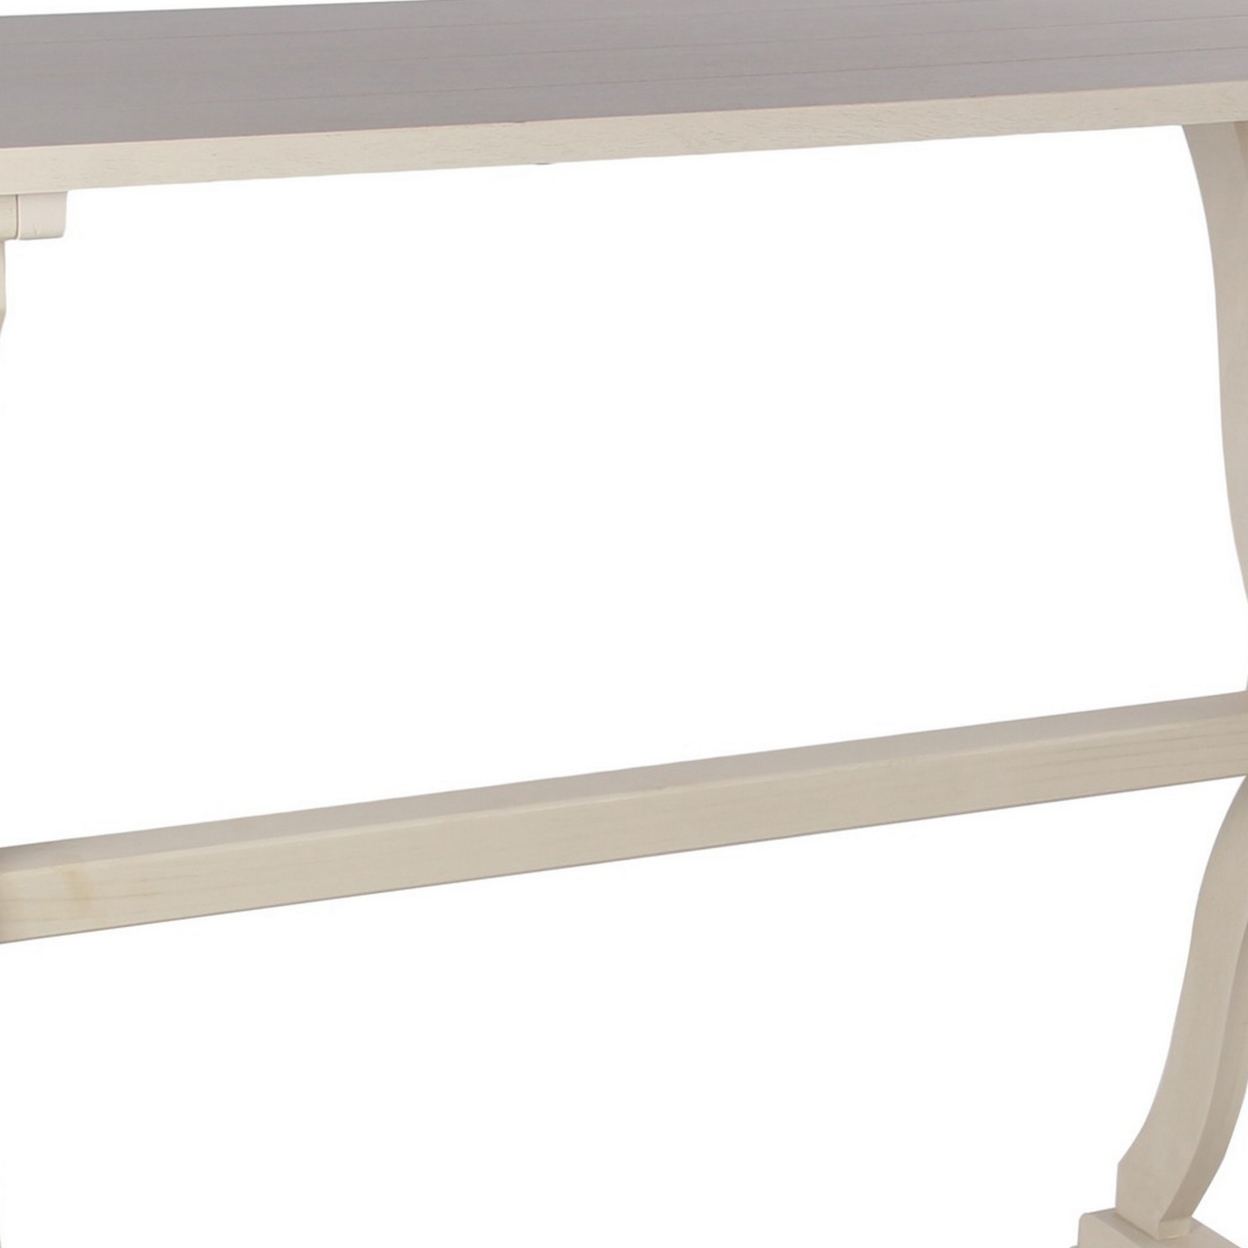 Pablo 38 Inch Classic Accent Console Table With Sled Base, Crisp White Rose- Saltoro Sherpi